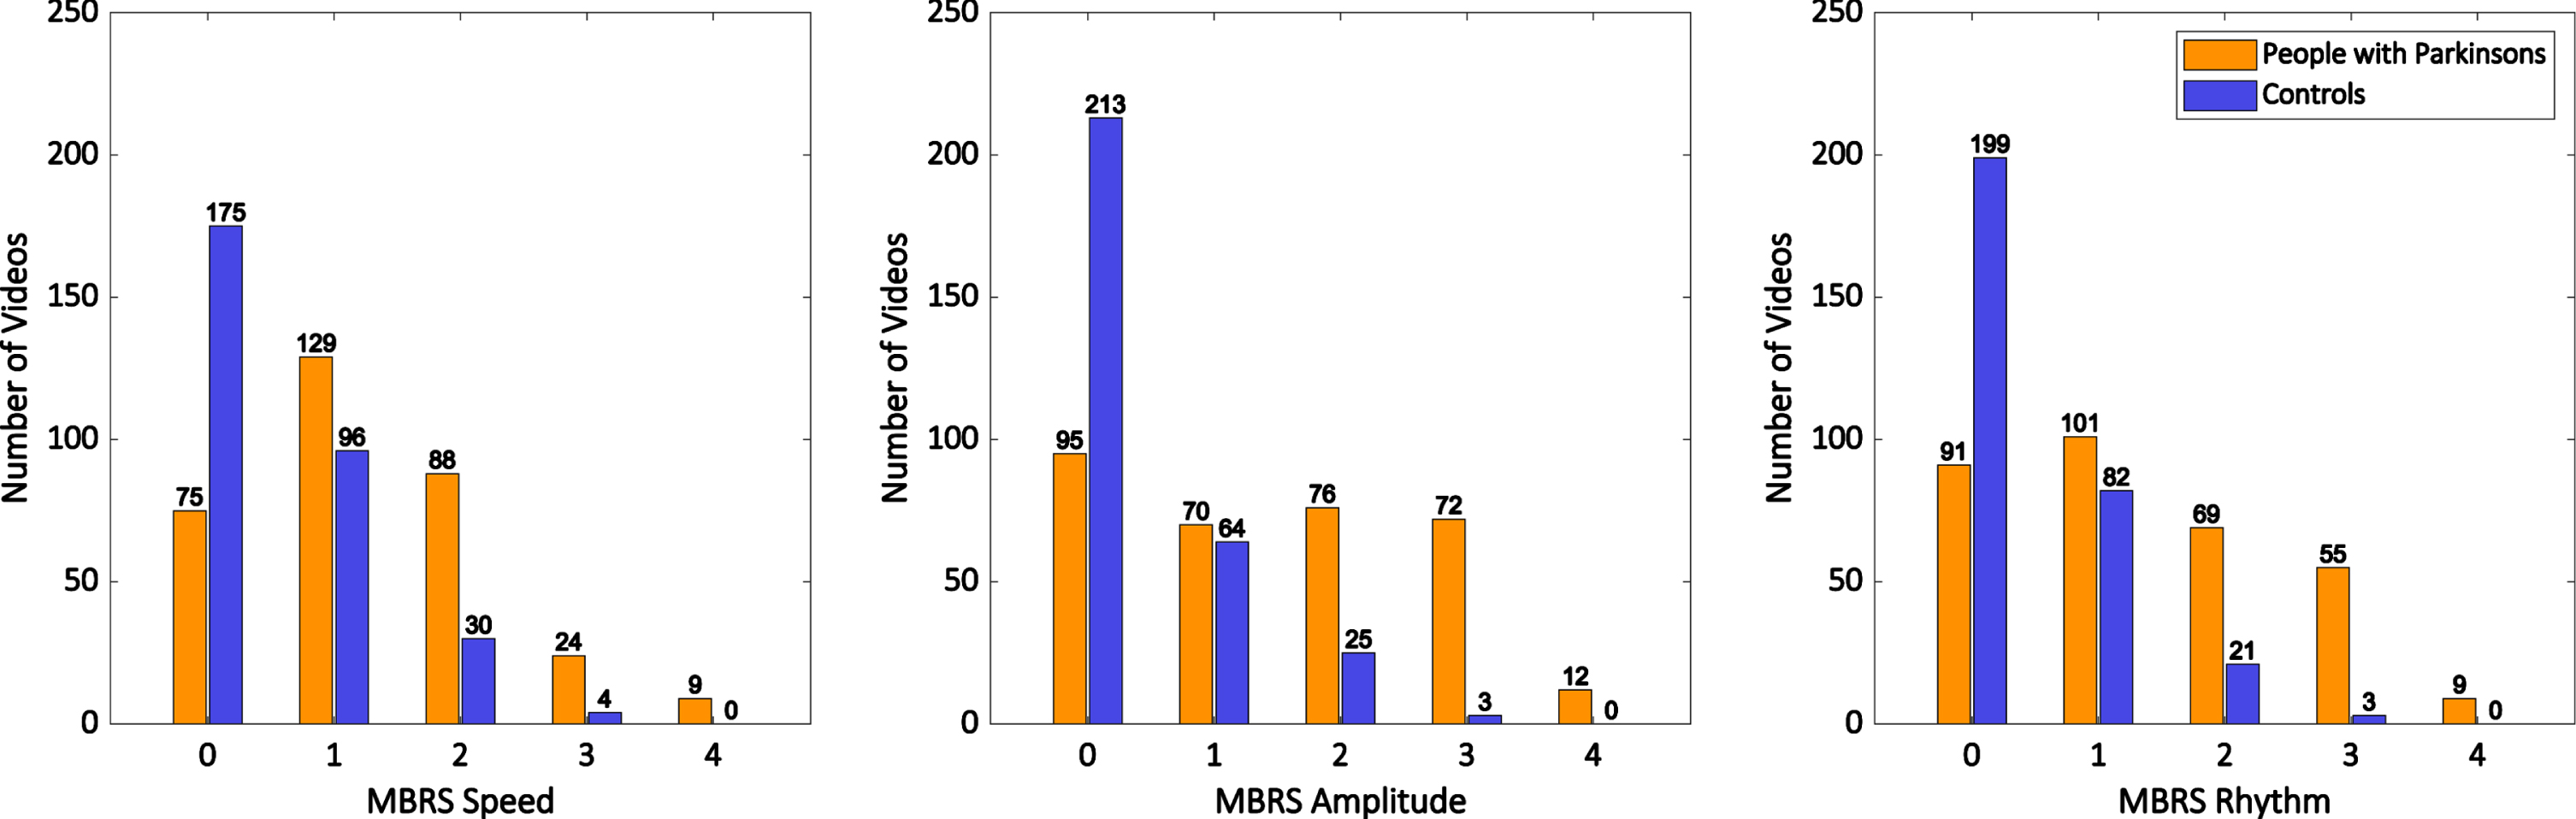 Histograms showing the distribution of MBRS finger tapping scores for all ratings of the hands of people with Parkinson’s disease (orange bars) and control participants (blue bars).